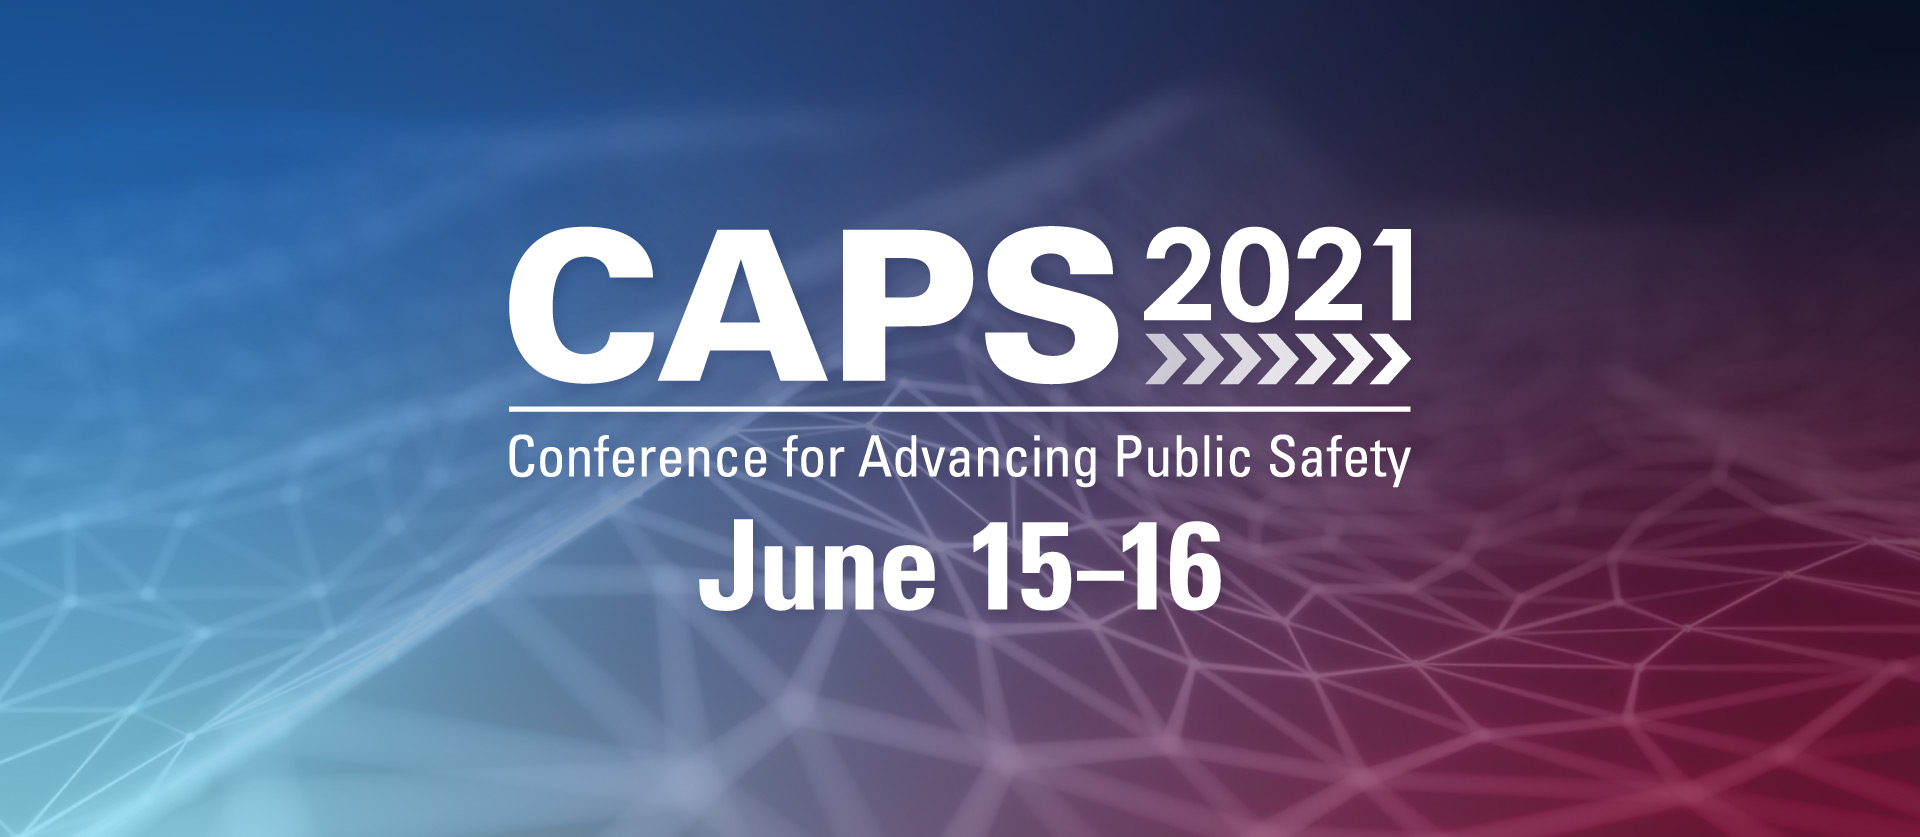 Conference for Advancing Public Safety Mission Critical Partners